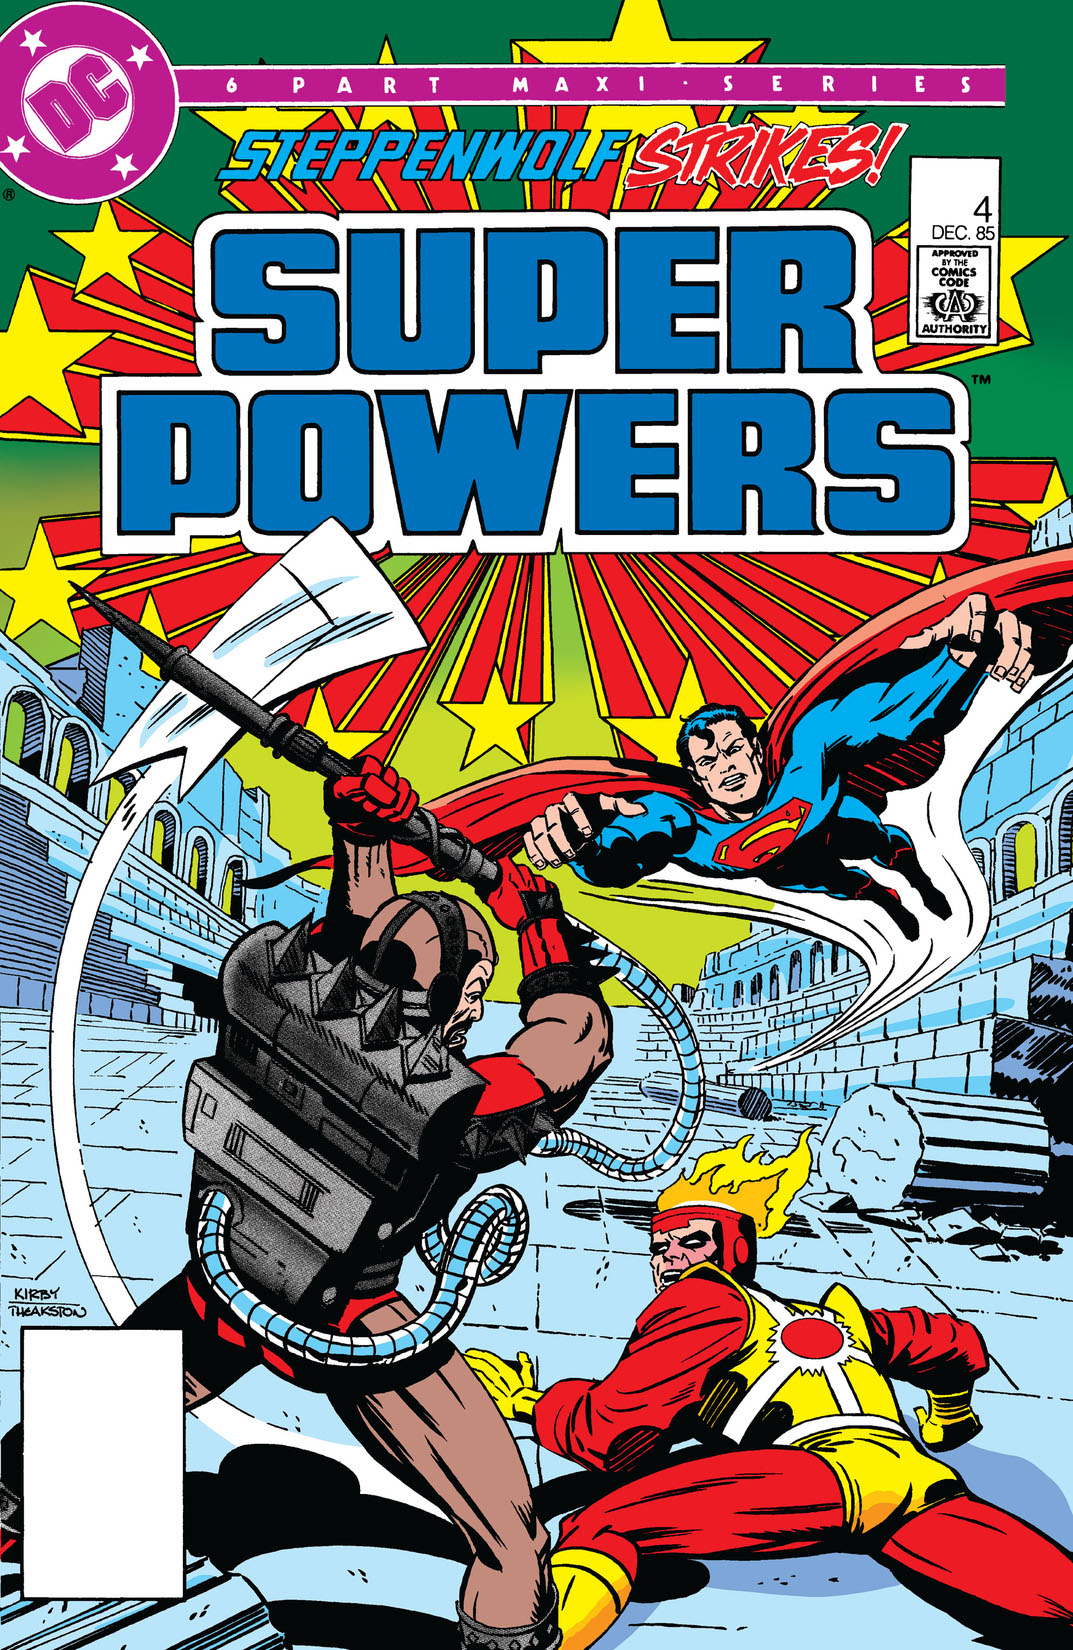 Super Powers (1985-) #4 preview images